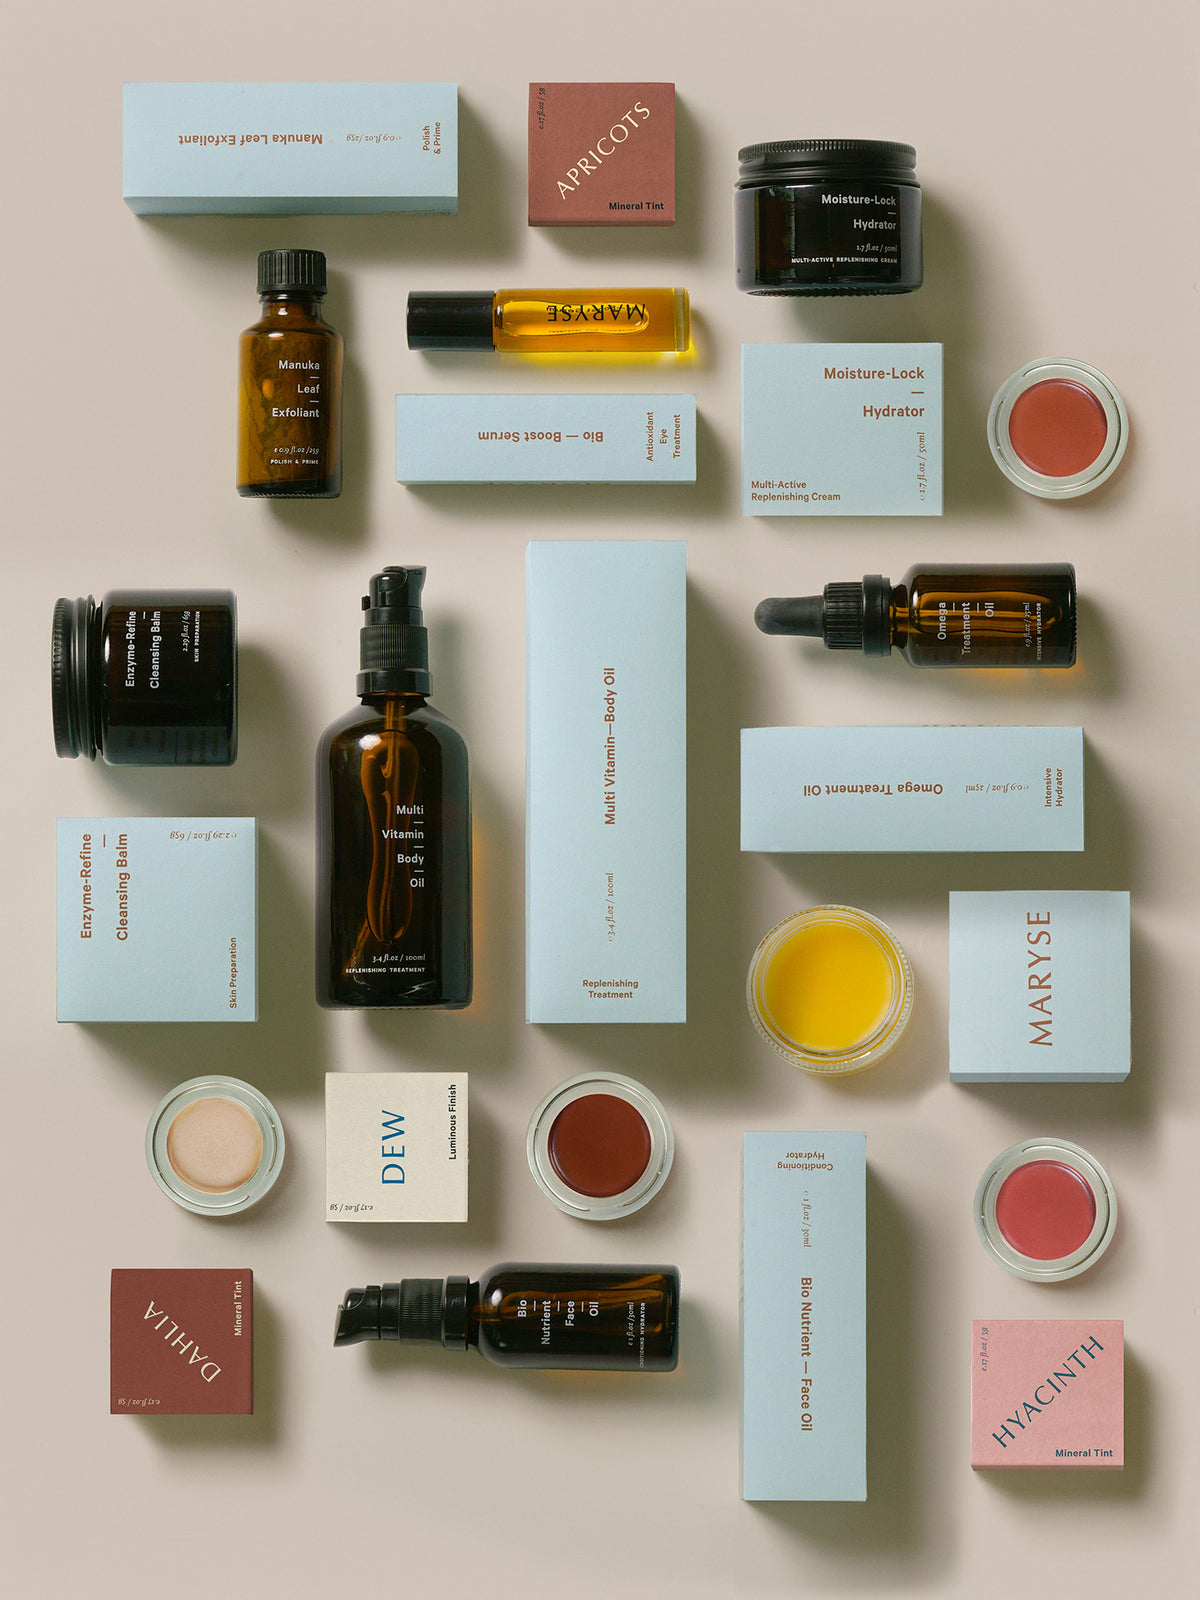 A collection of MARYSE Omega – Treatment Oil cosmetics arranged on a white surface.